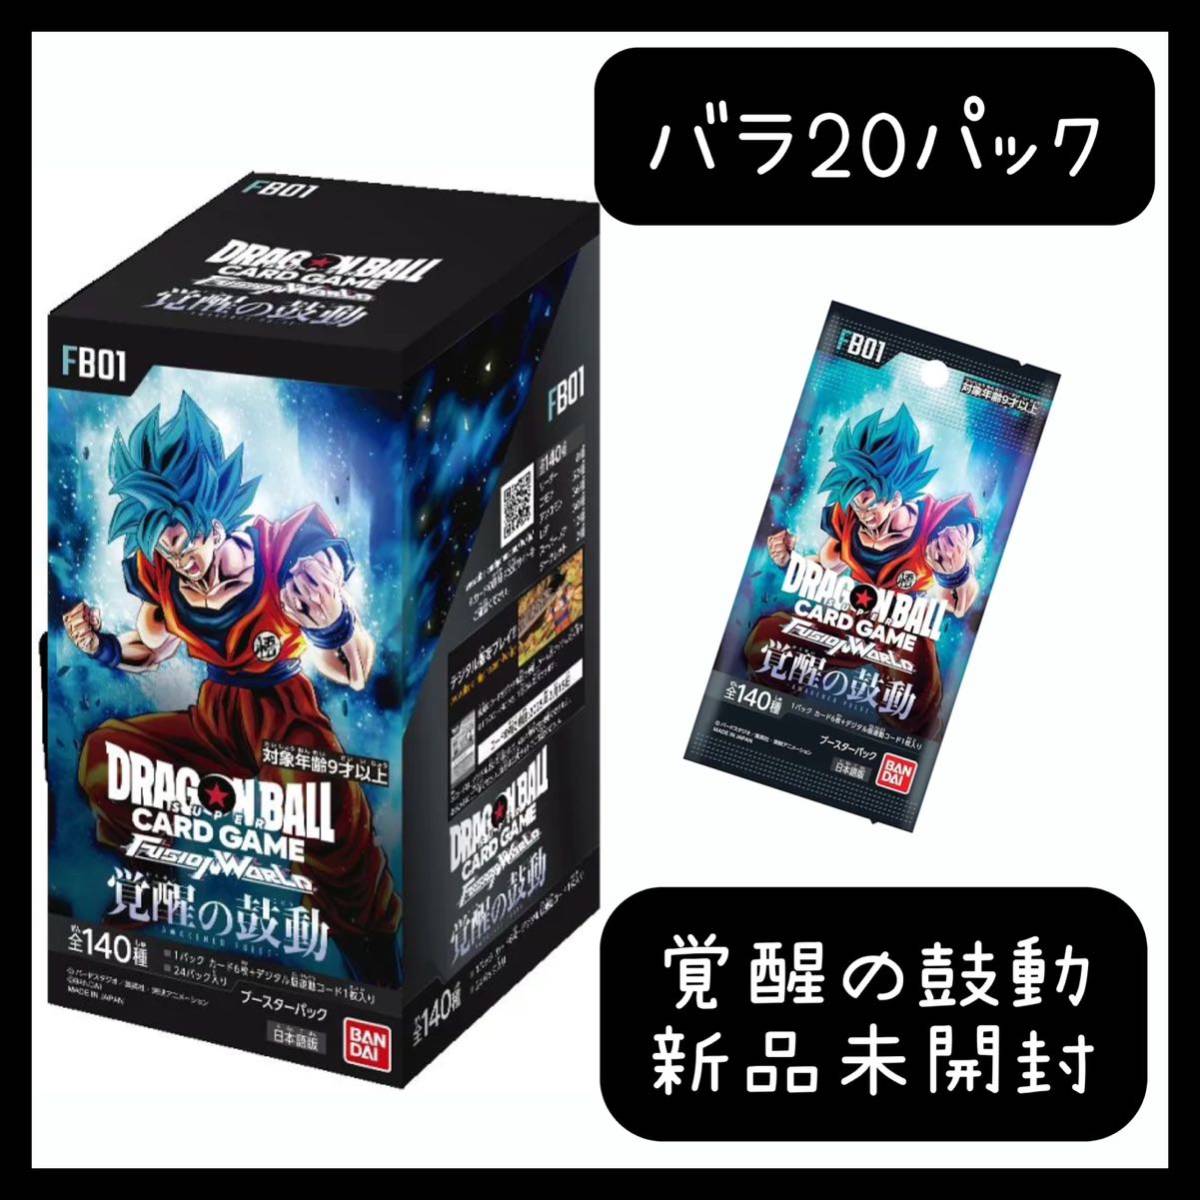 *1 jpy start * Dragon Ball card game ... hand drum moving rose 20 pack new goods unopened 